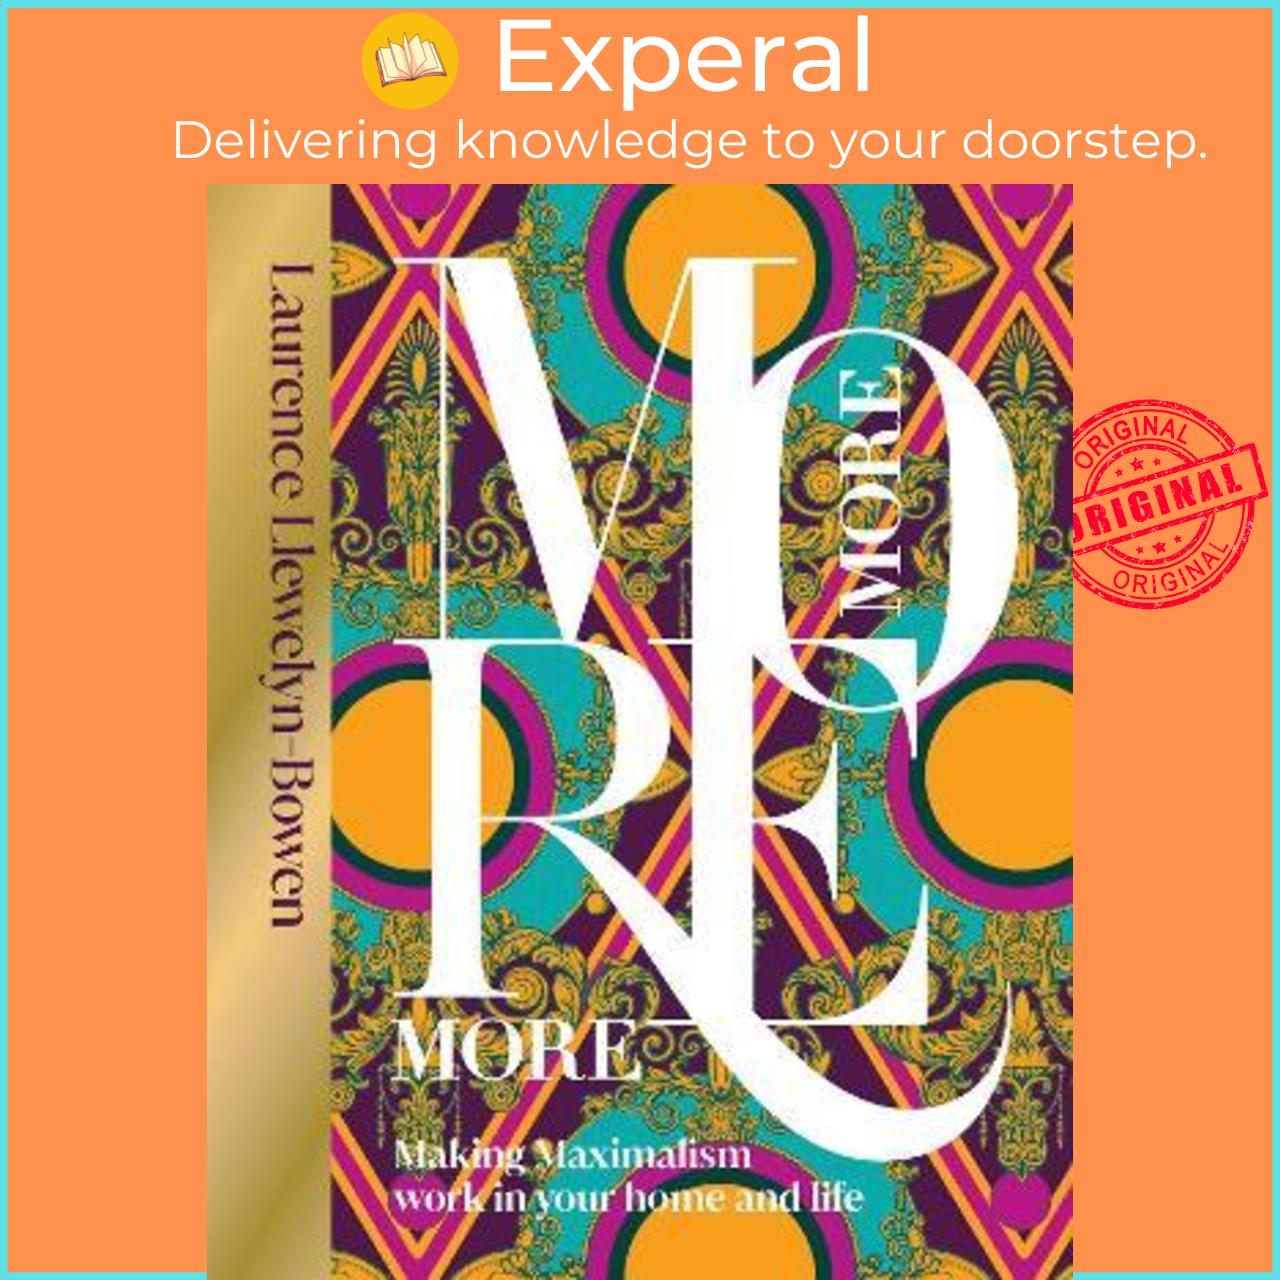 Sách - More More More : Making Maximalism Work in Your Home and Life by Laurence Llewelyn-Bowen (UK edition, hardcover)